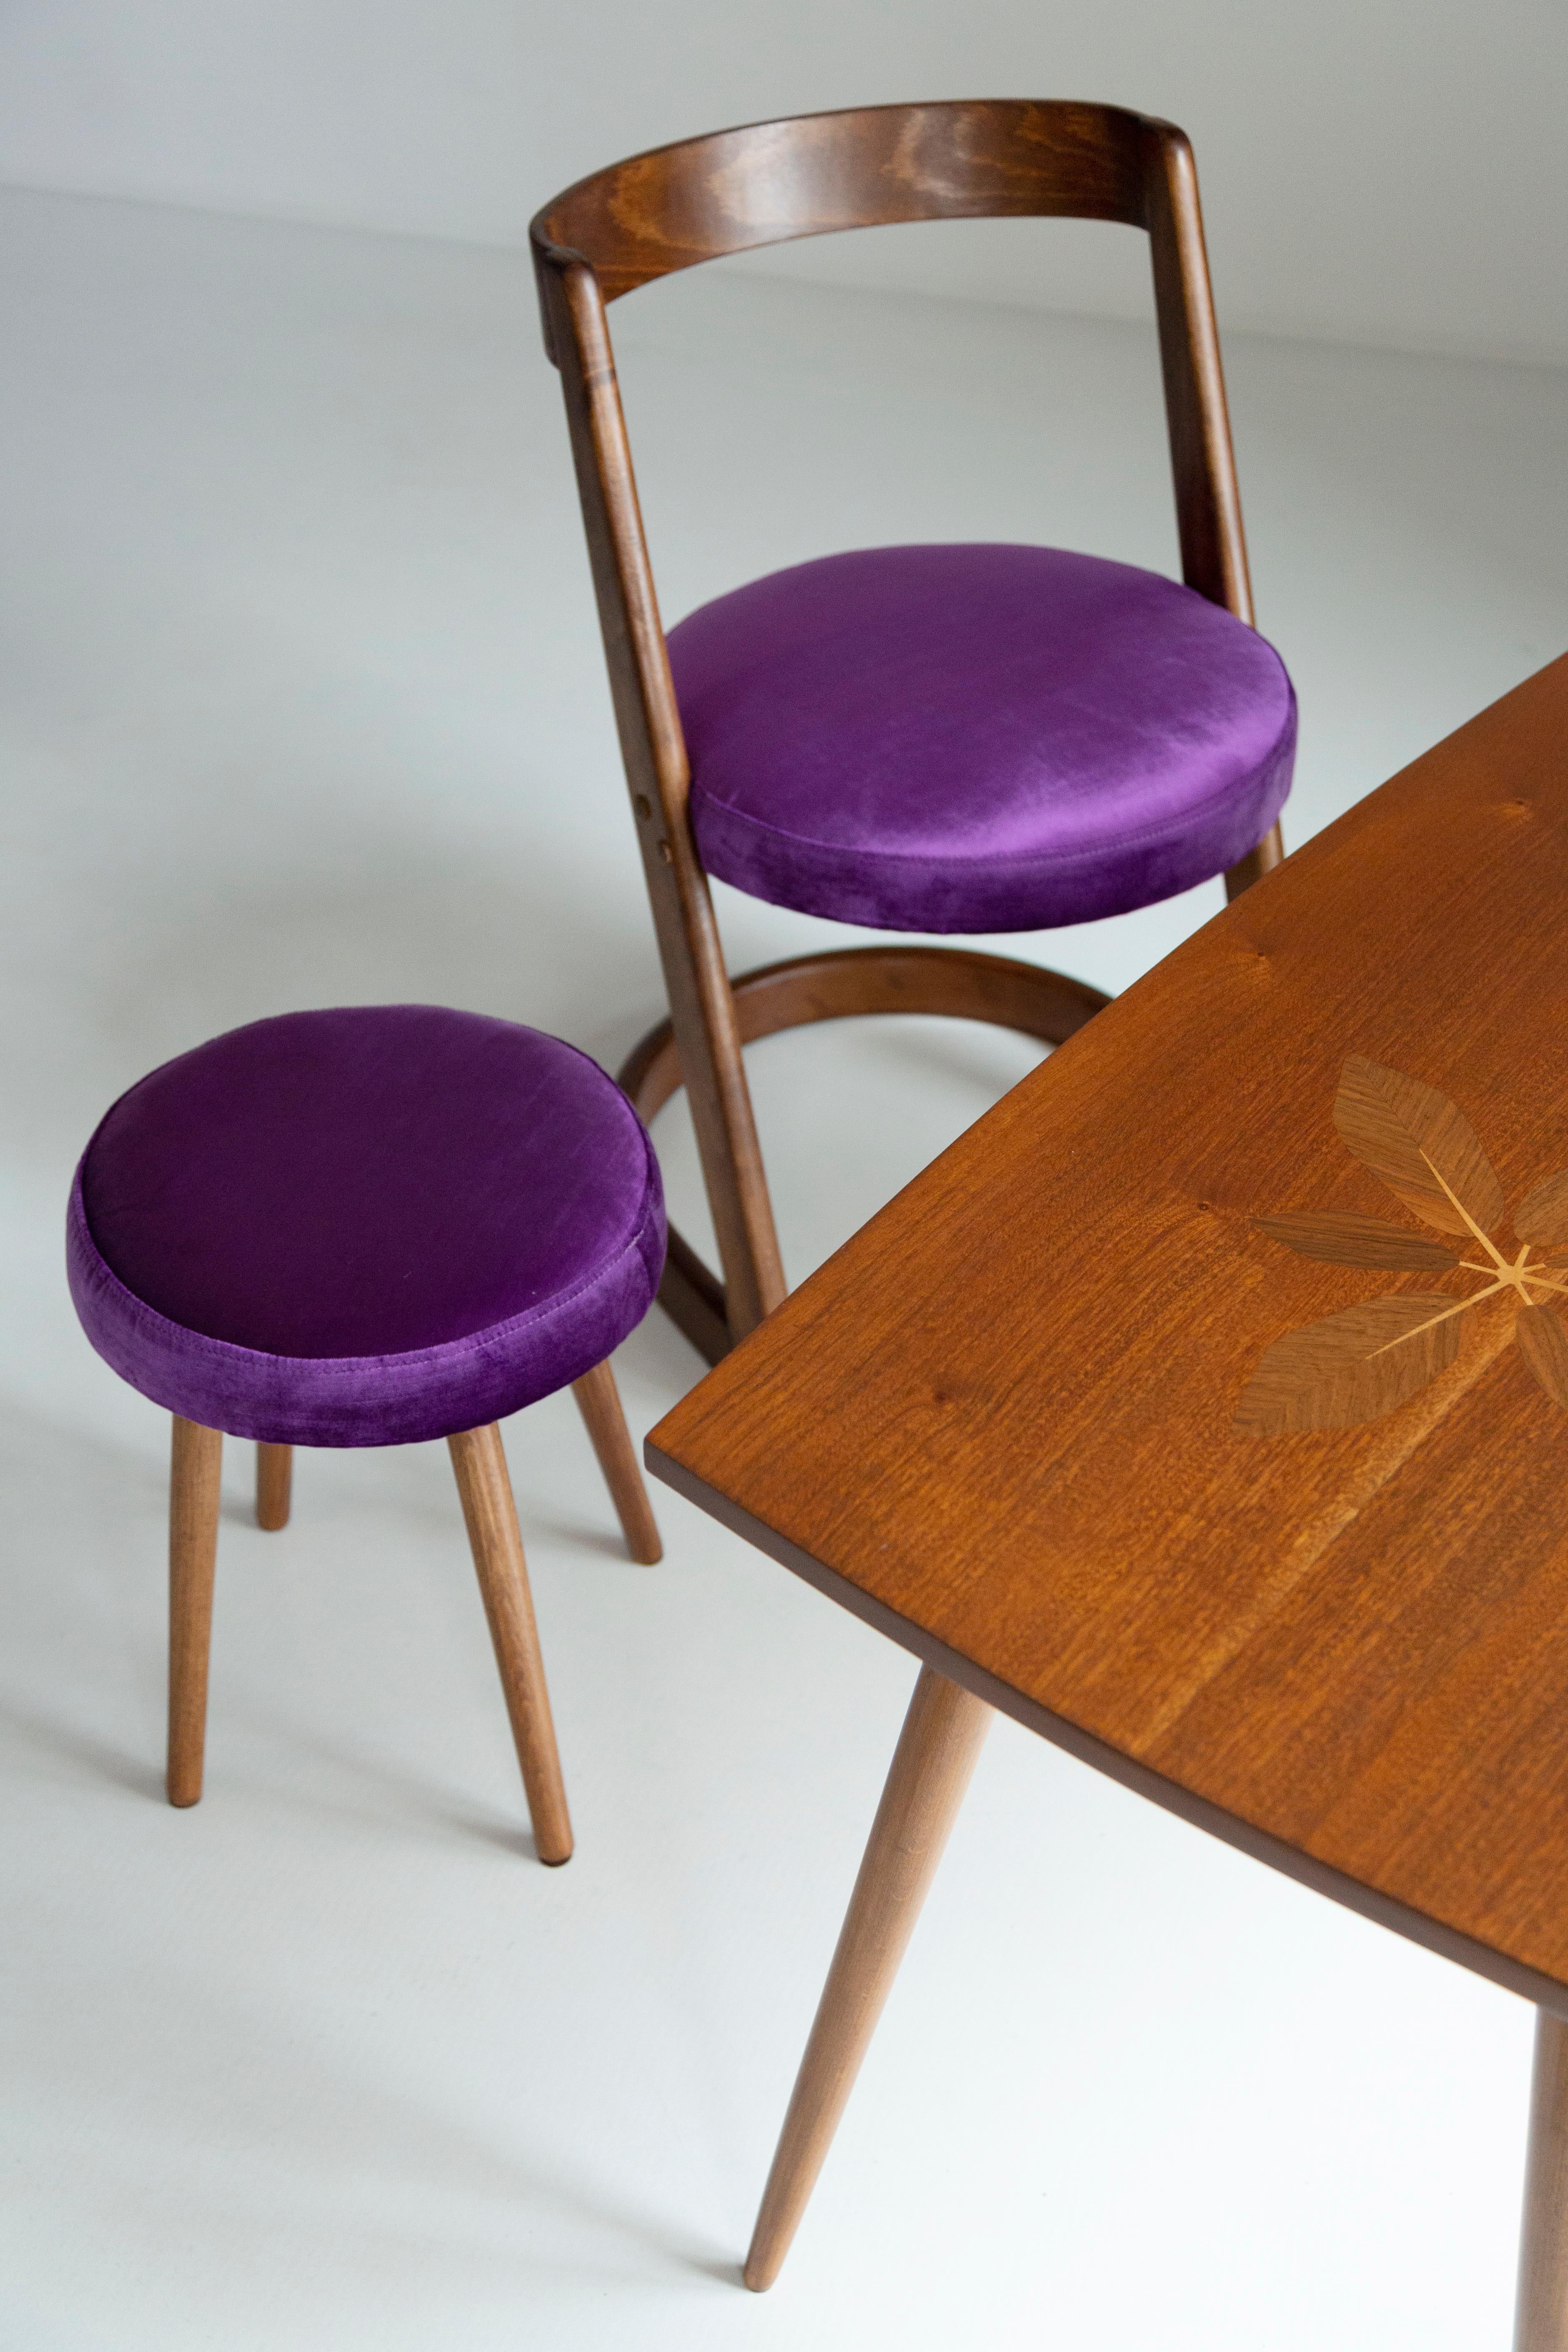 Halfa Chair designed by Baumann in the 1970s. 
In the catalogue of the avant-garde collection.
Made from 5 pieces of Doubs beech.

Made of beechwood. Chair is after a complete upholstery renovation, the woodwork has been refreshed. Seat is